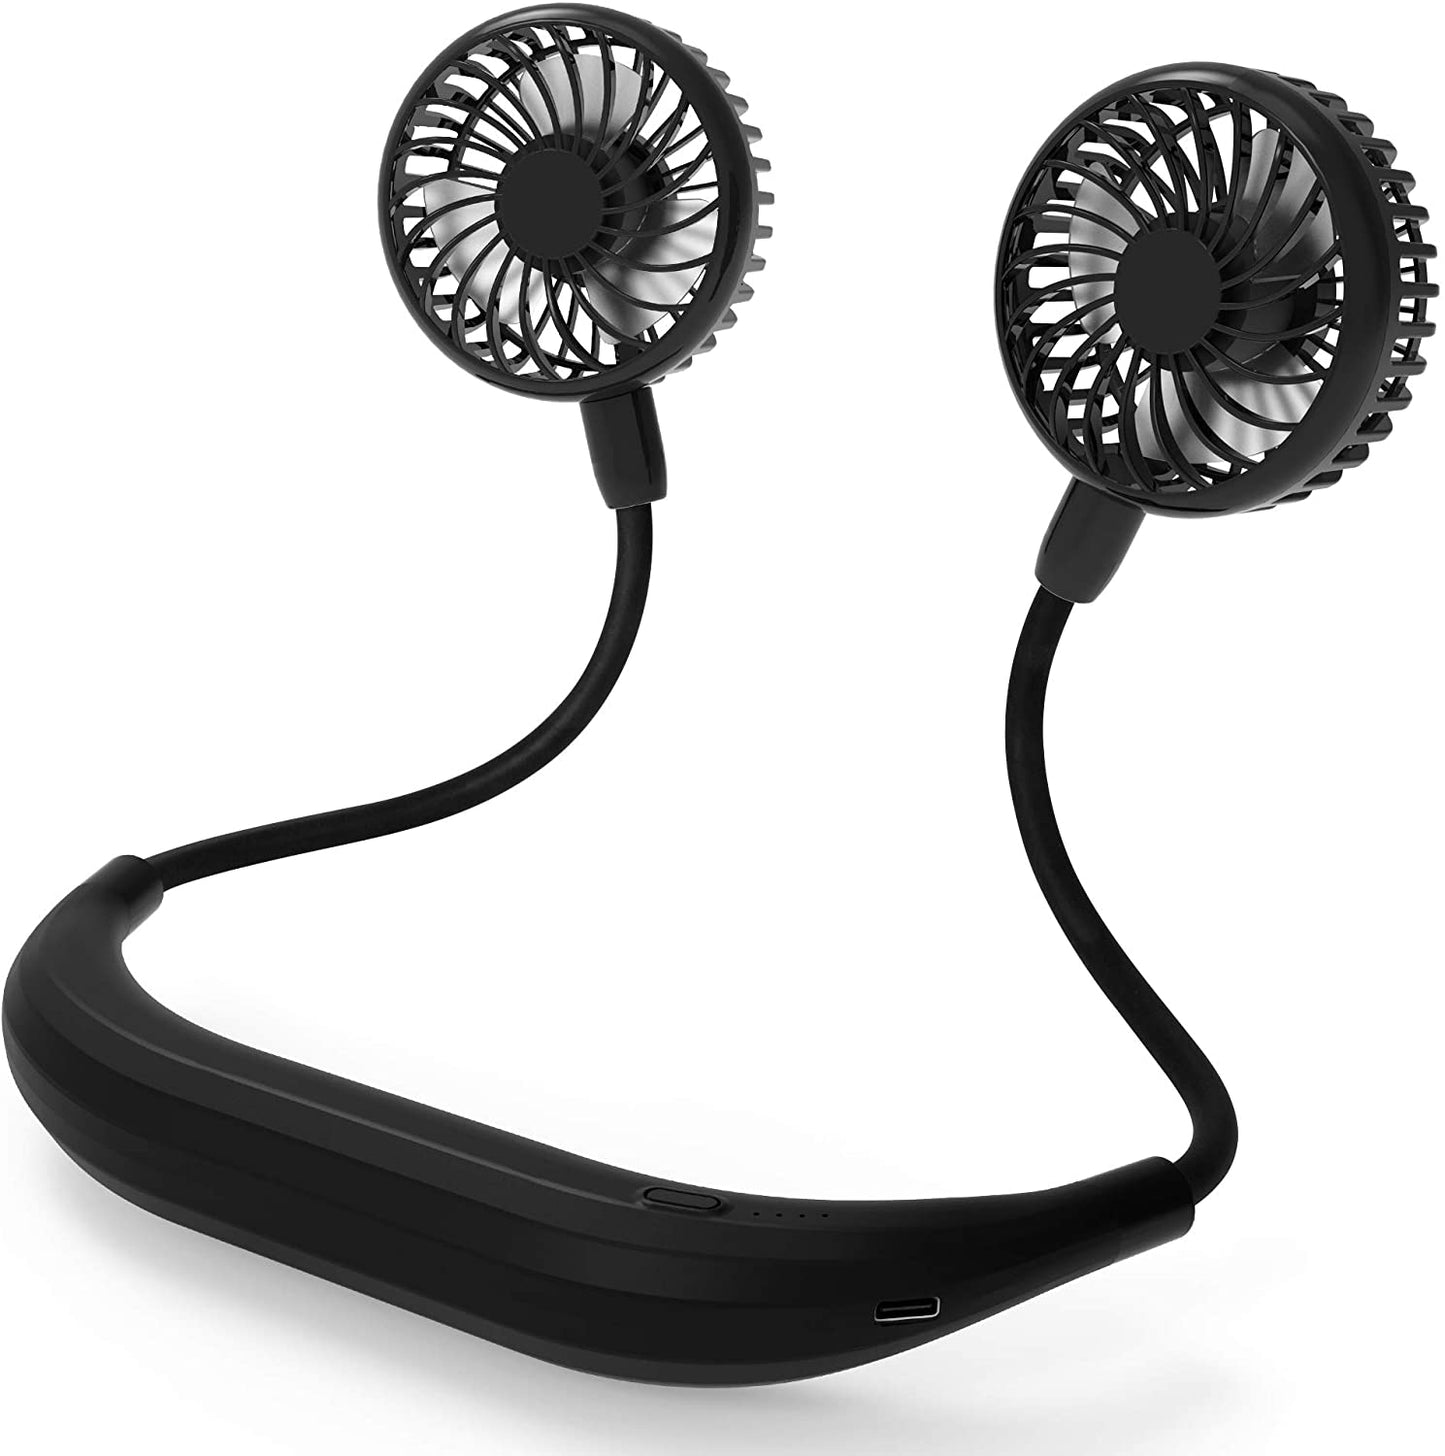 Neck Fan, 5200mAh Battery Powered Neckband Fan With 4 Speeds, Natural Wind Mode, 360° Adjustable, Hands-Free Portable Personal Fan for Sports, Home, Office, Trave (Black) - Home Decor Gifts and More